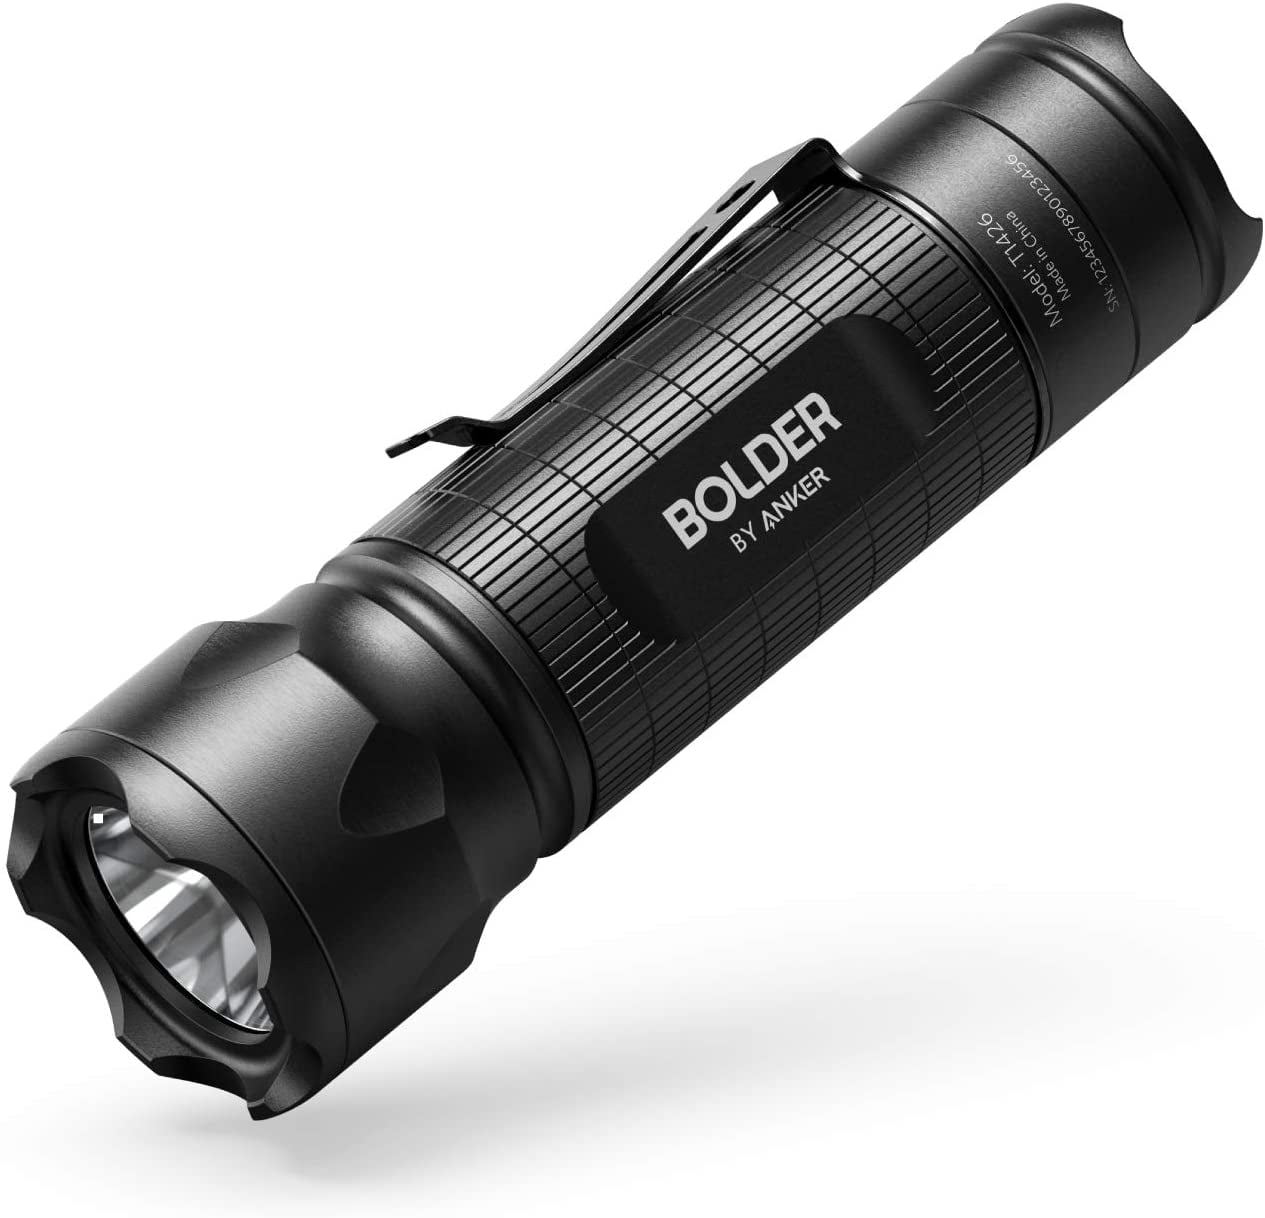 CREE LED Torch Pocket-Sized Zoomable TORCH  FLASHLIGHT 3 Light Modes Waterproof 